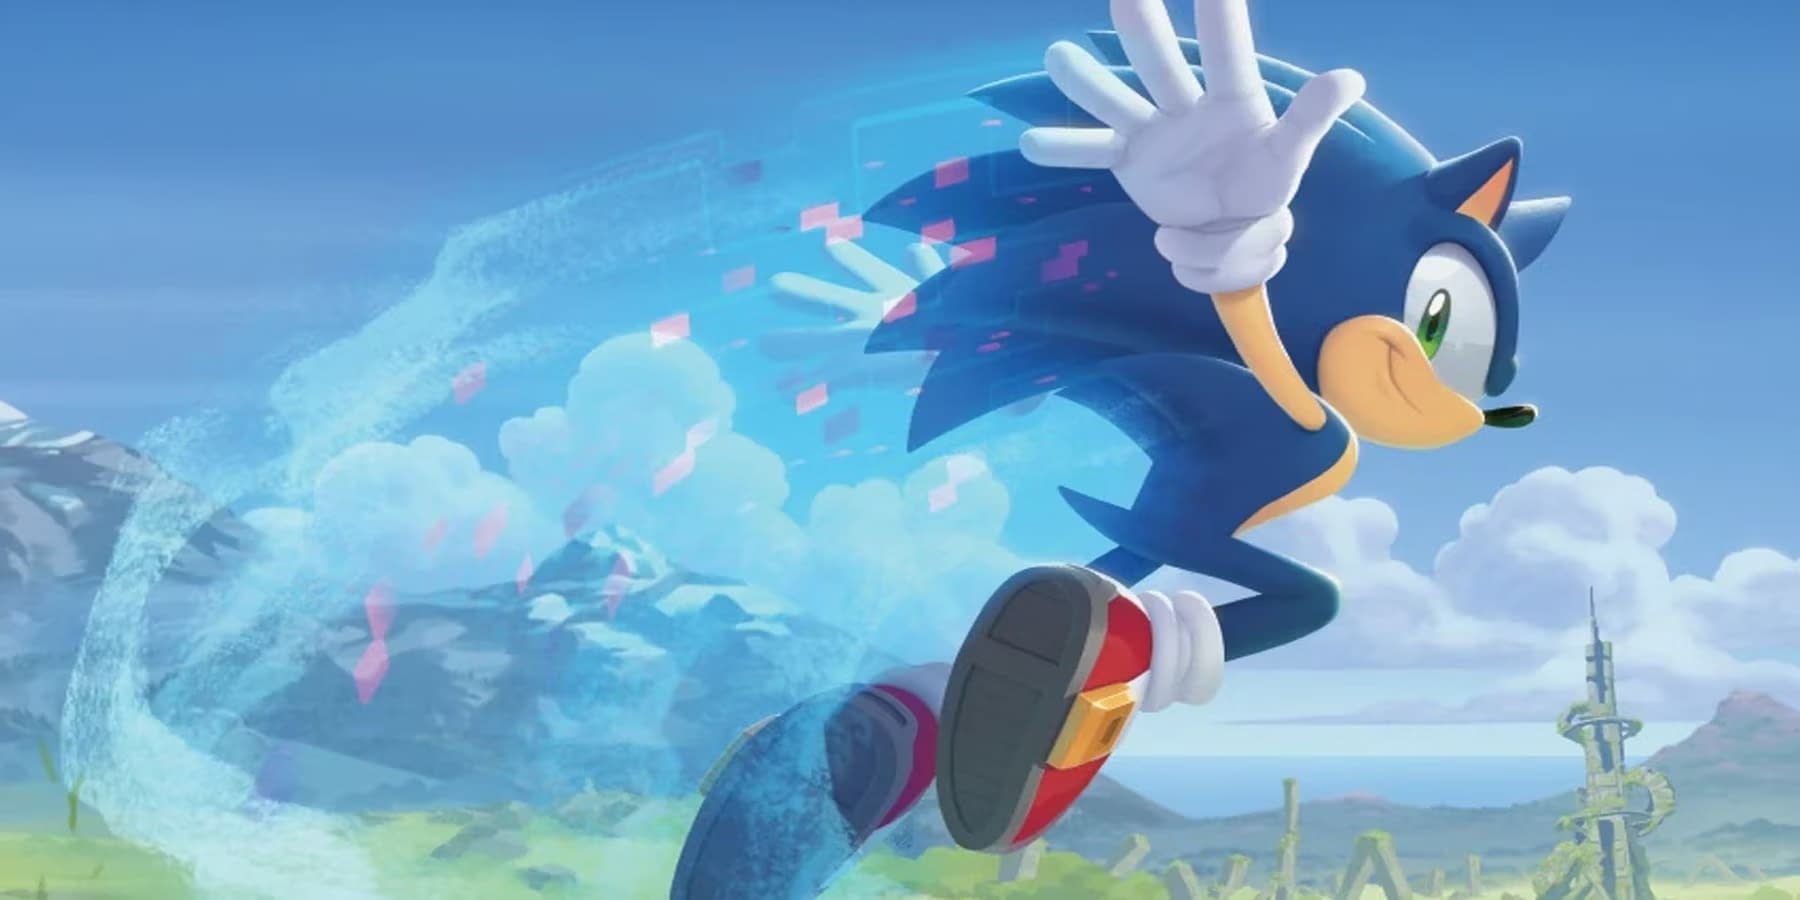 Sonic the Hedgehog Series Sales and Downloads Increase to 1.5 Billion